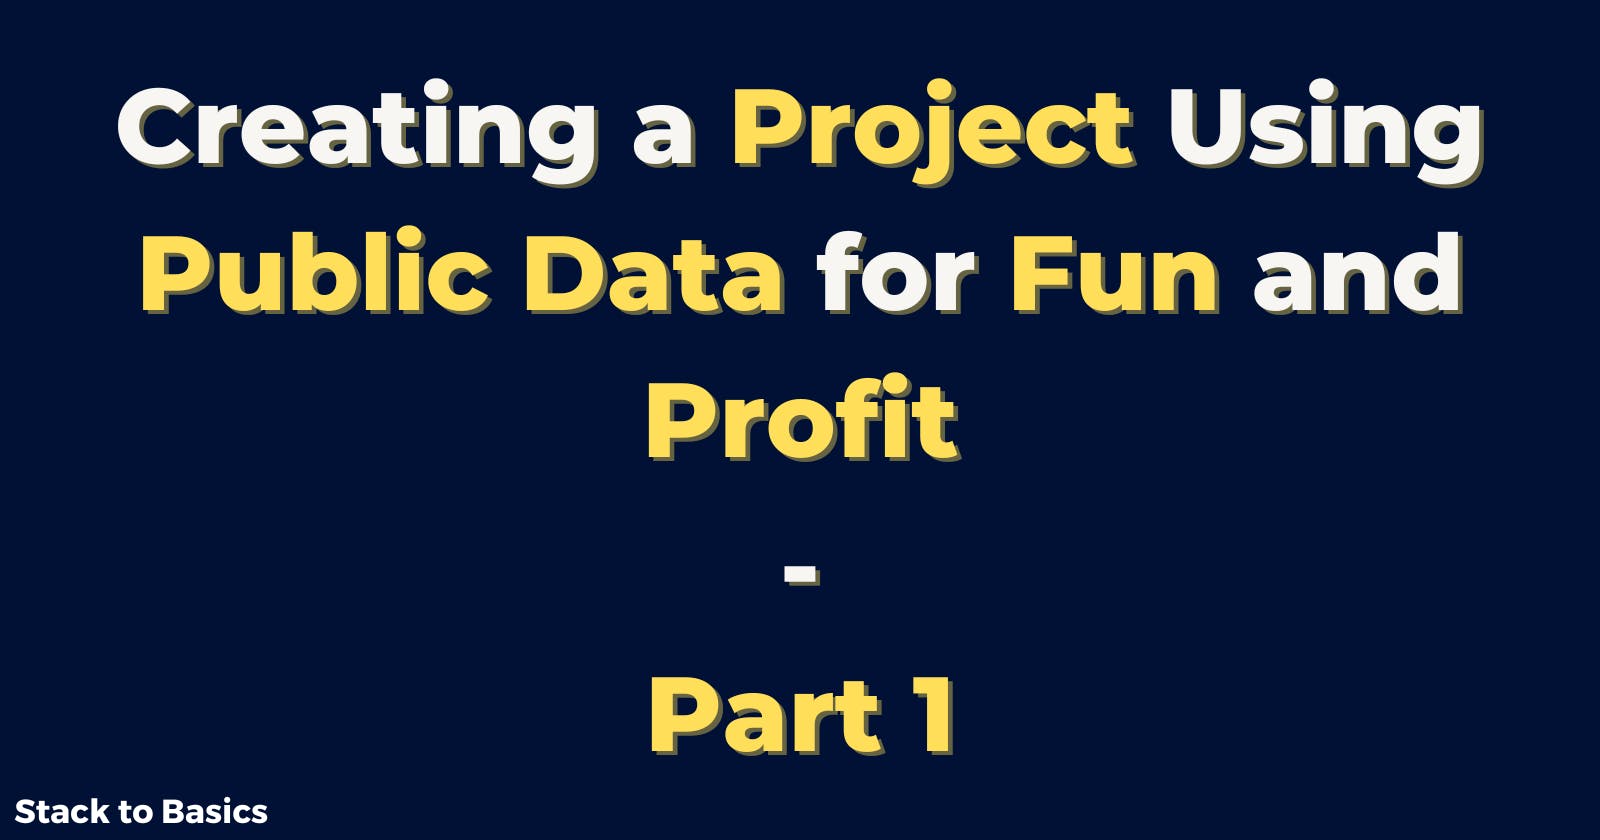 Creating a Project Using Public Data for Fun and Profit: Part 1